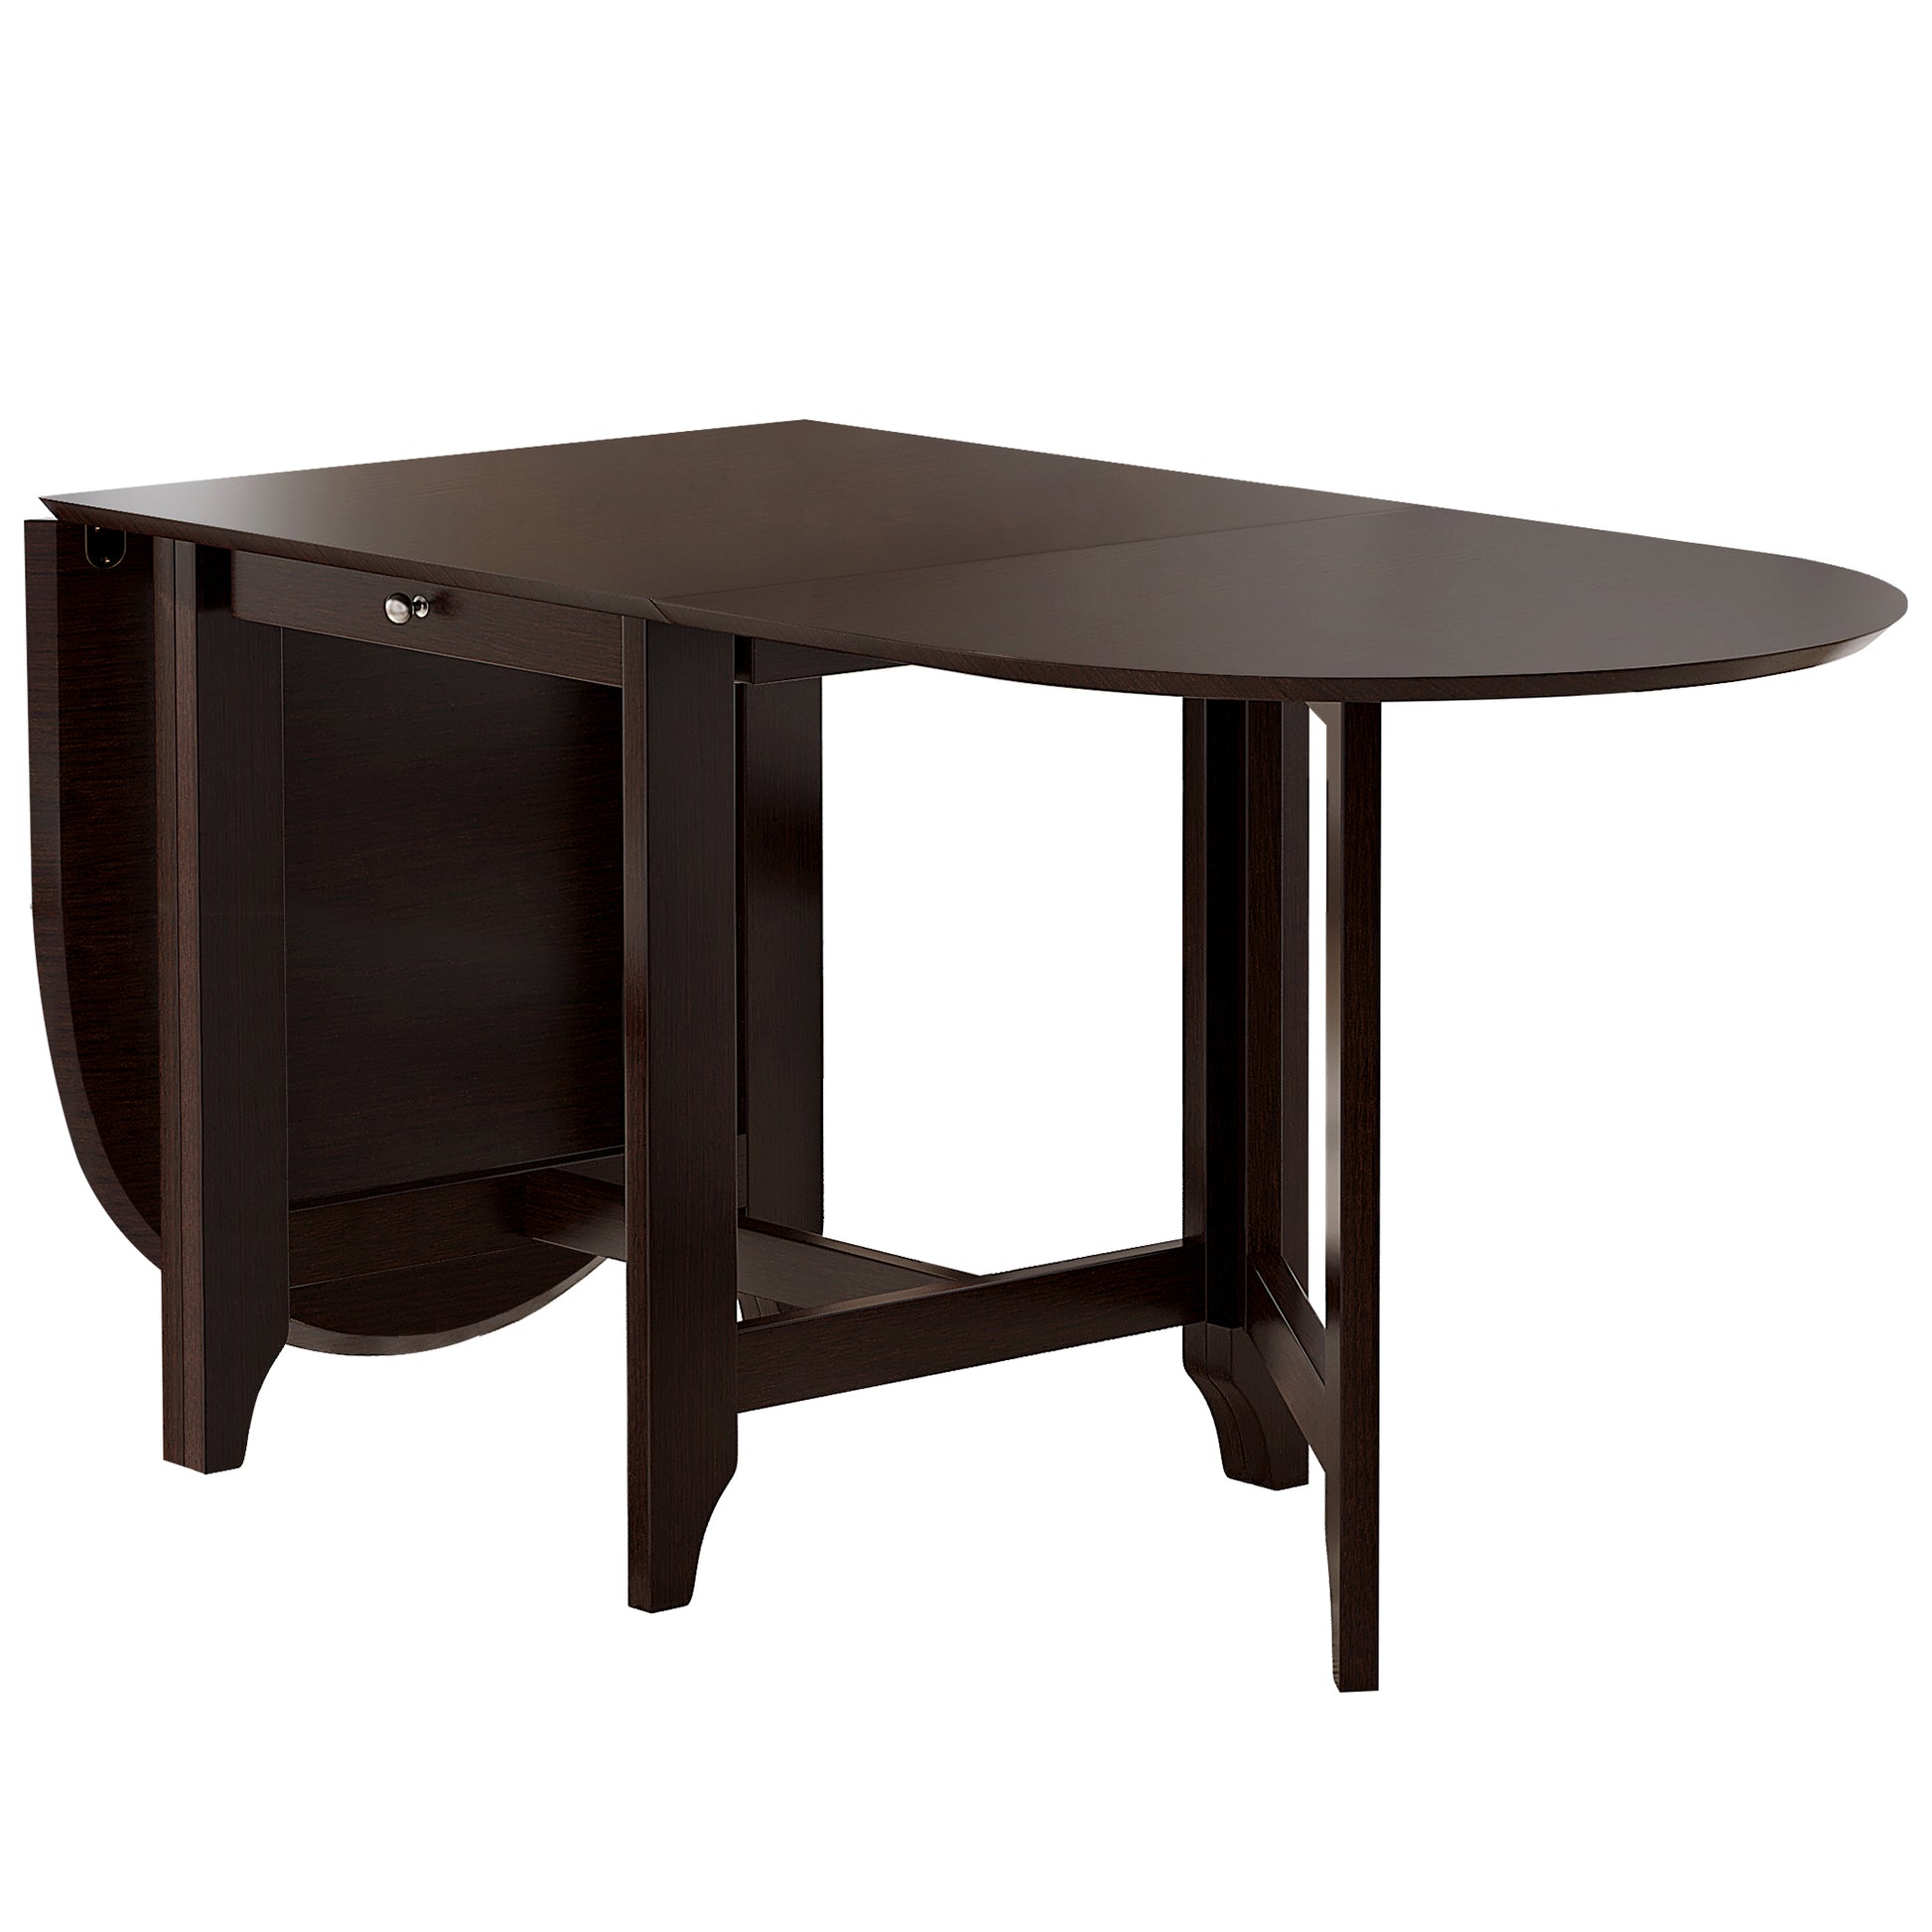 Retro Drop-Leaf Table Dining Table - Ukerr Home